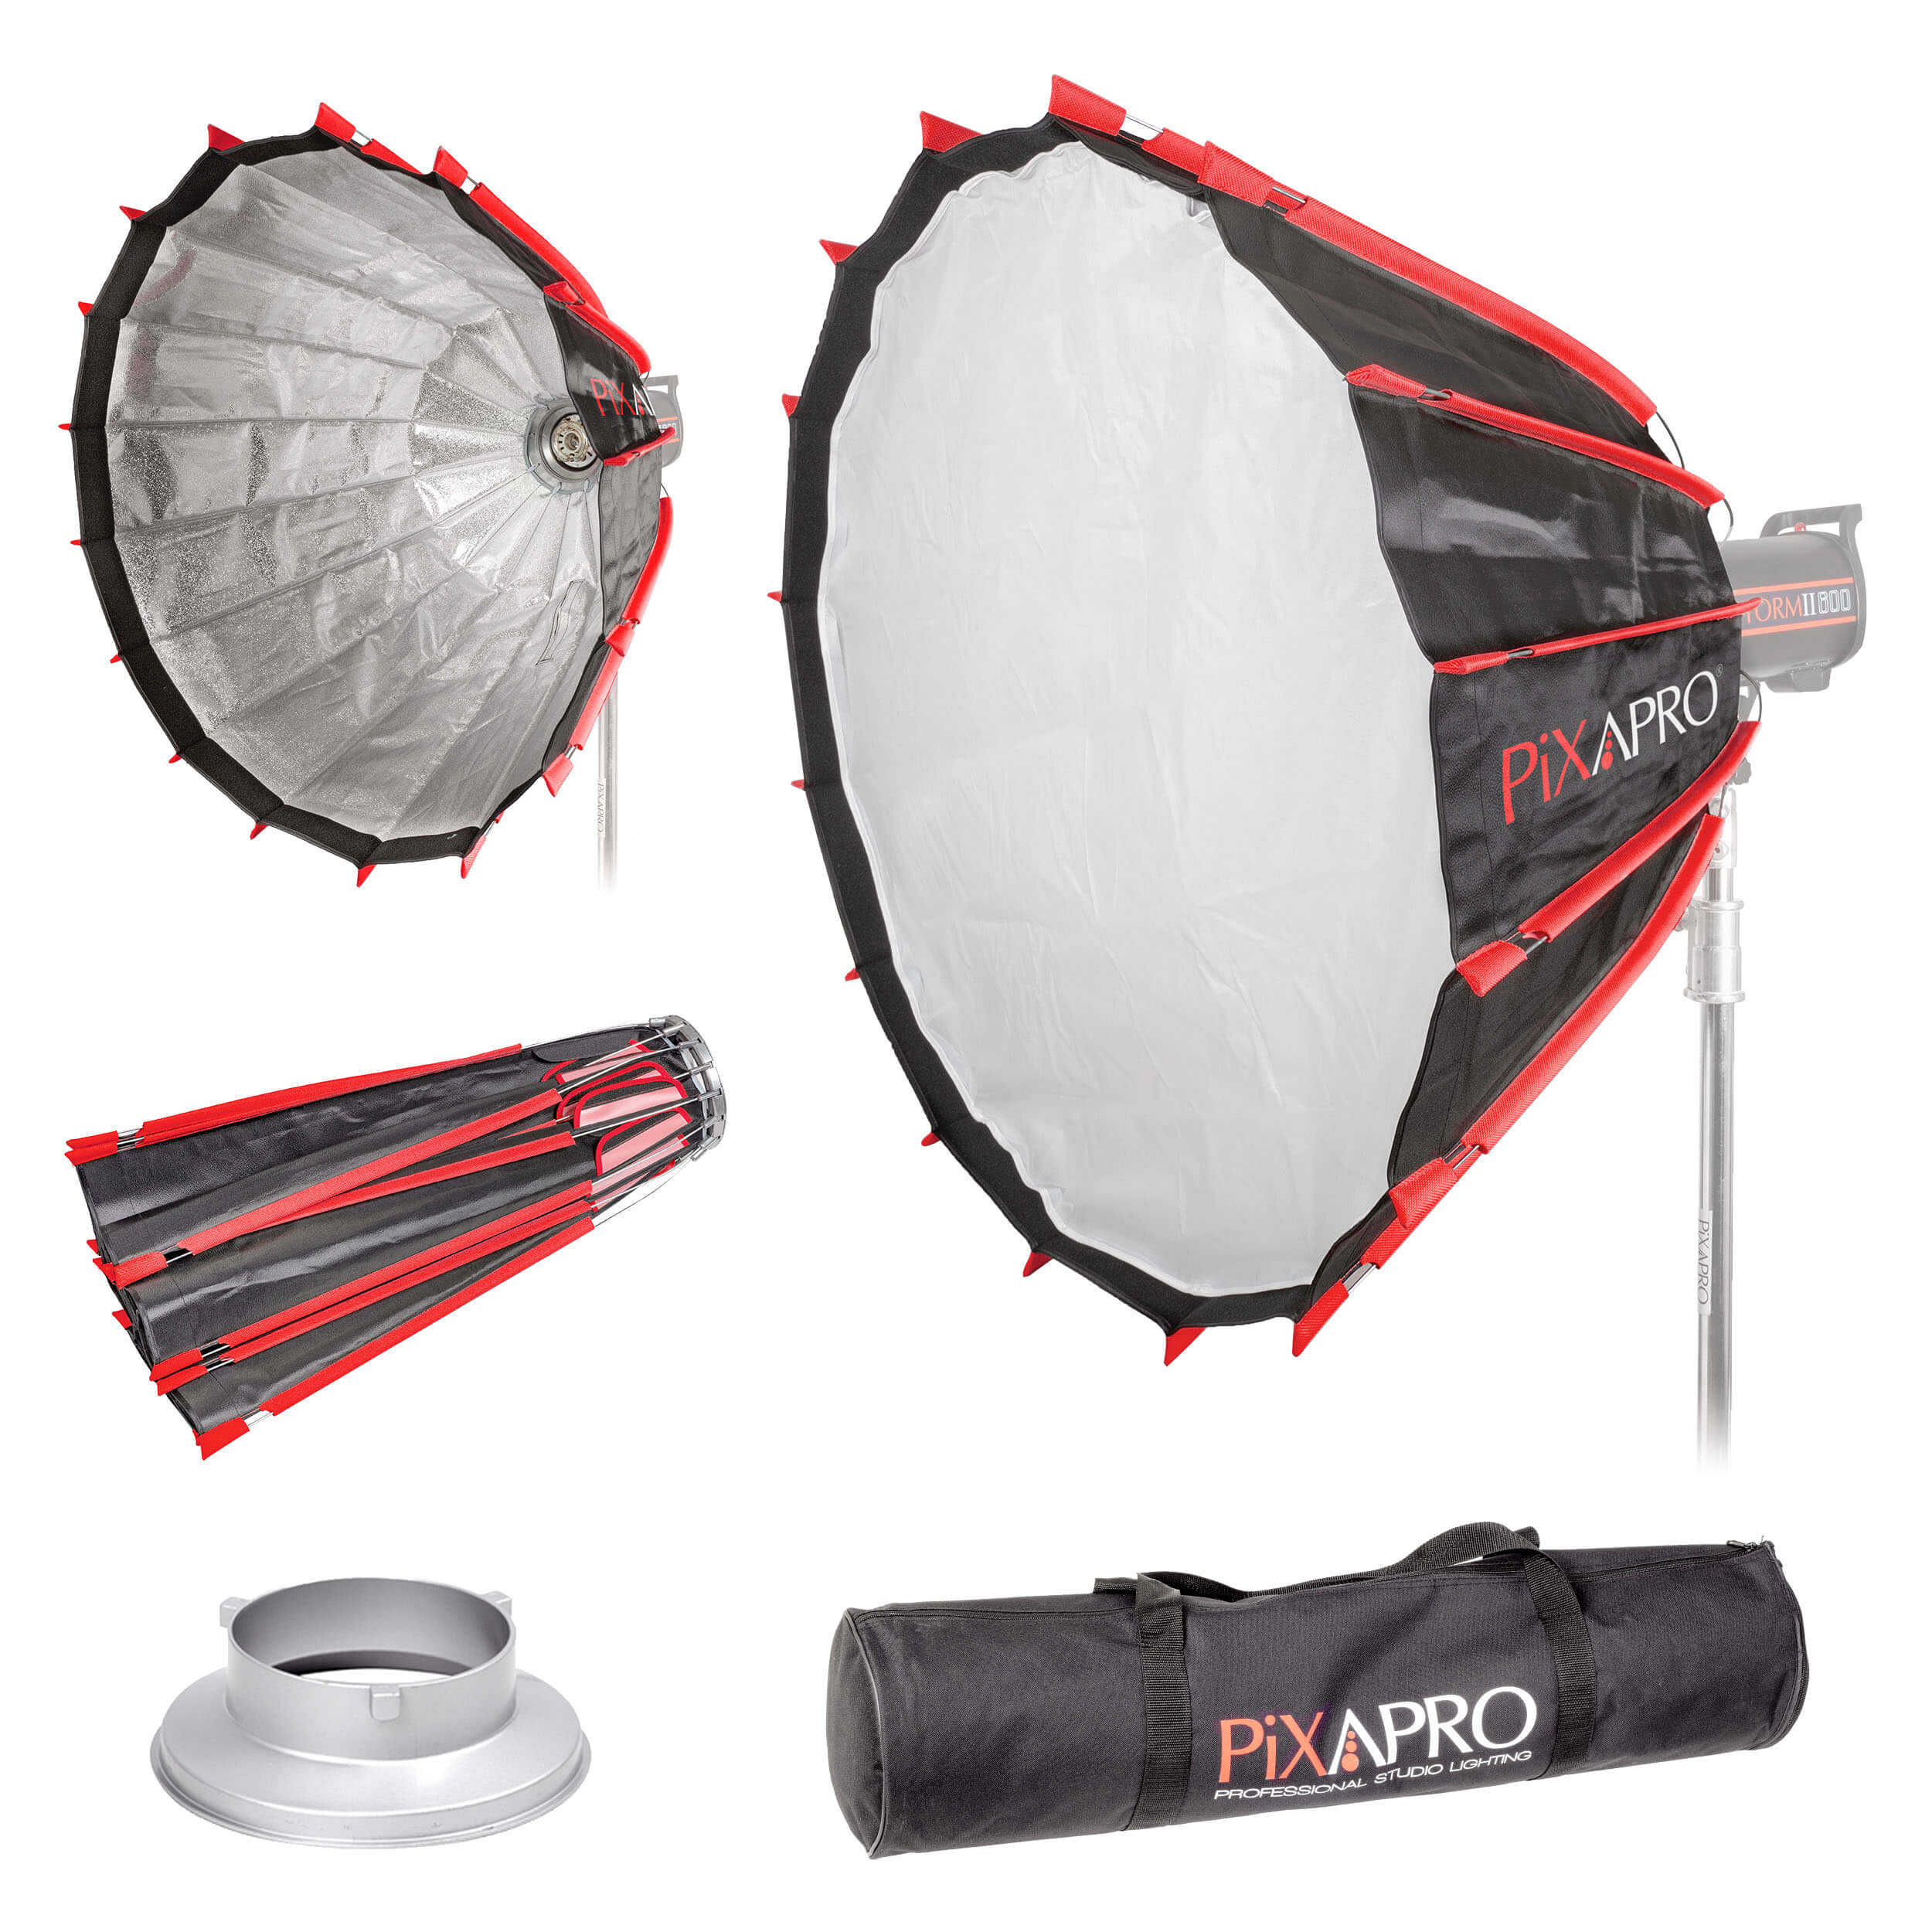 DeepPara110 Fast-Open Parabolic Softbox with Interchangeable Fitting For Bowens 